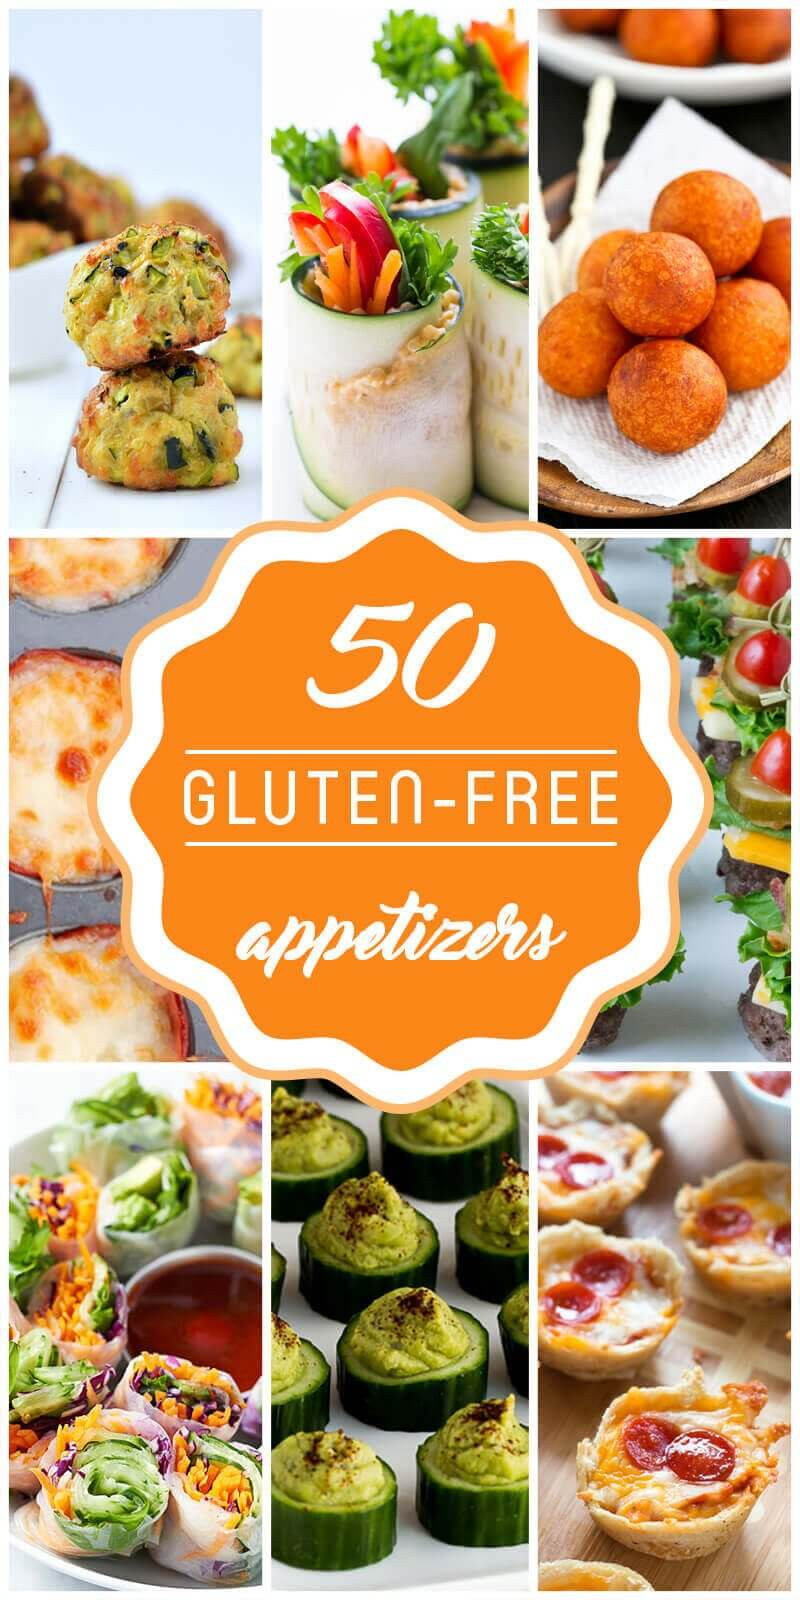 Gluten And Dairy Free Appetizers
 50 Best Gluten Free Appetizer Recipes to Serve for Your